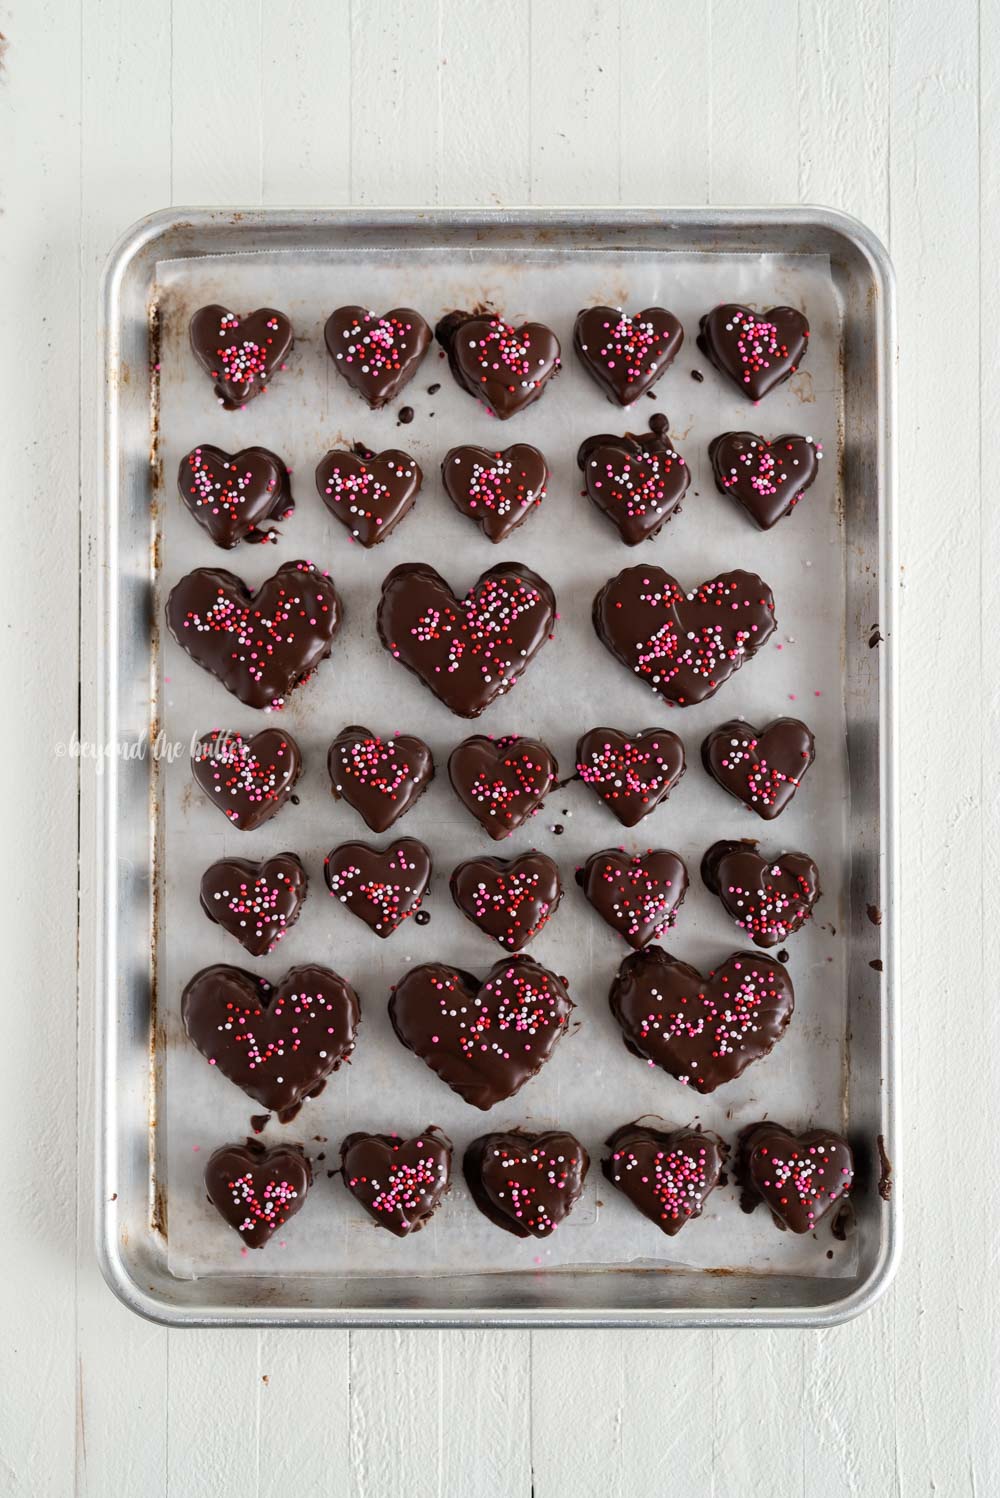 Overhead image of chocolate covered cookie dough hearts with sprinkles | All Images © Beyond the Butter, LLC